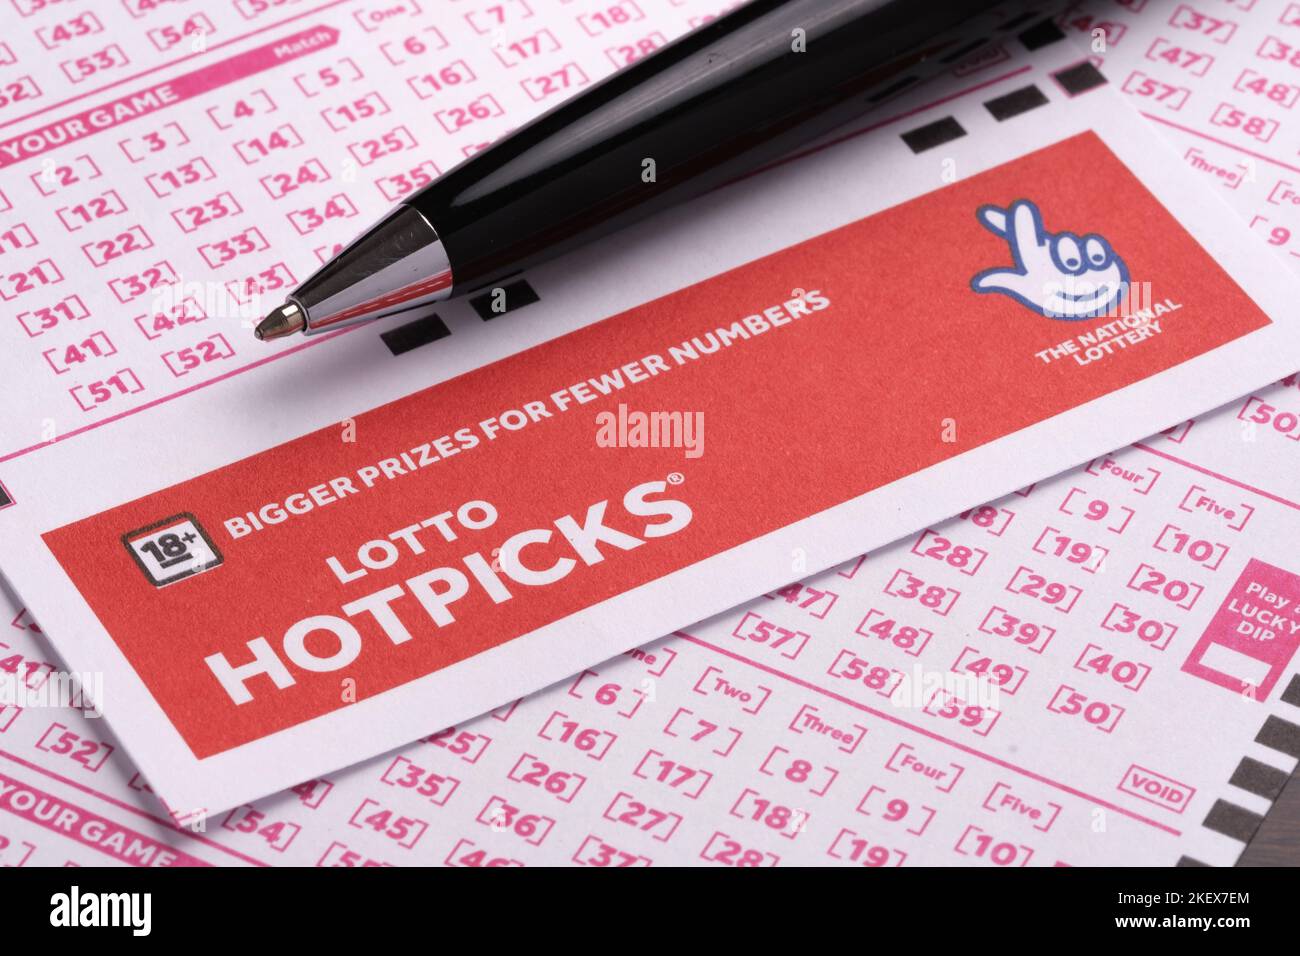 LOTTO HOTPICKS blank lottery tickets and the black pen placed on top. UK National Lottery. Selective focus. Stafford, United Kingdom, November 14, 202 Stock Photo